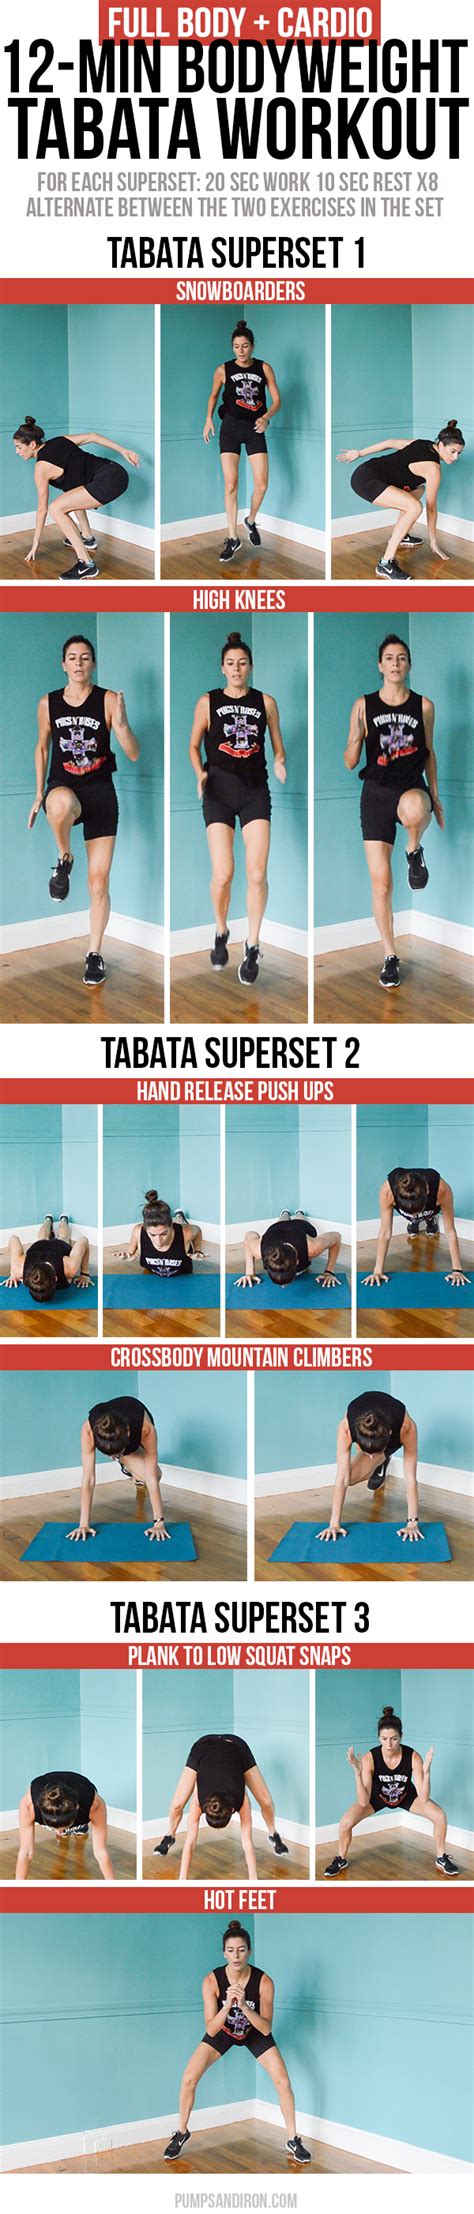 12 Minute Bodyweight Tabata Workout Series Full Body